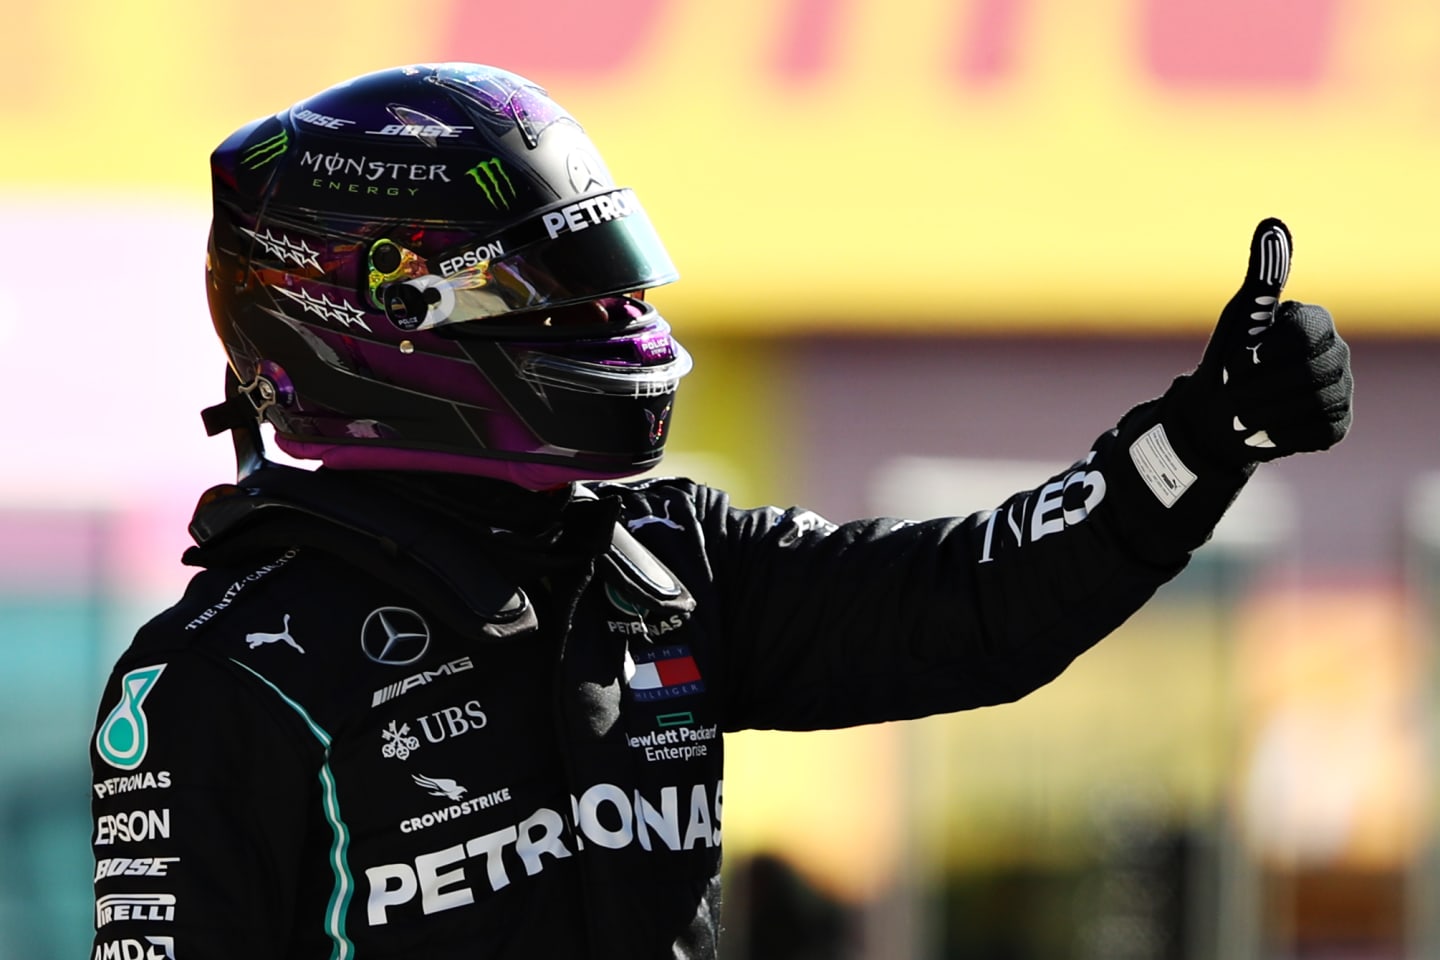 SCARPERIA, ITALY - SEPTEMBER 12: Pole position qualifier Lewis Hamilton of Great Britain and Mercedes GP celebrates in parc ferme during qualifying for the F1 Grand Prix of Tuscany at Mugello Circuit on September 12, 2020 in Scarperia, Italy. (Photo by Bryn Lennon/Getty Images)